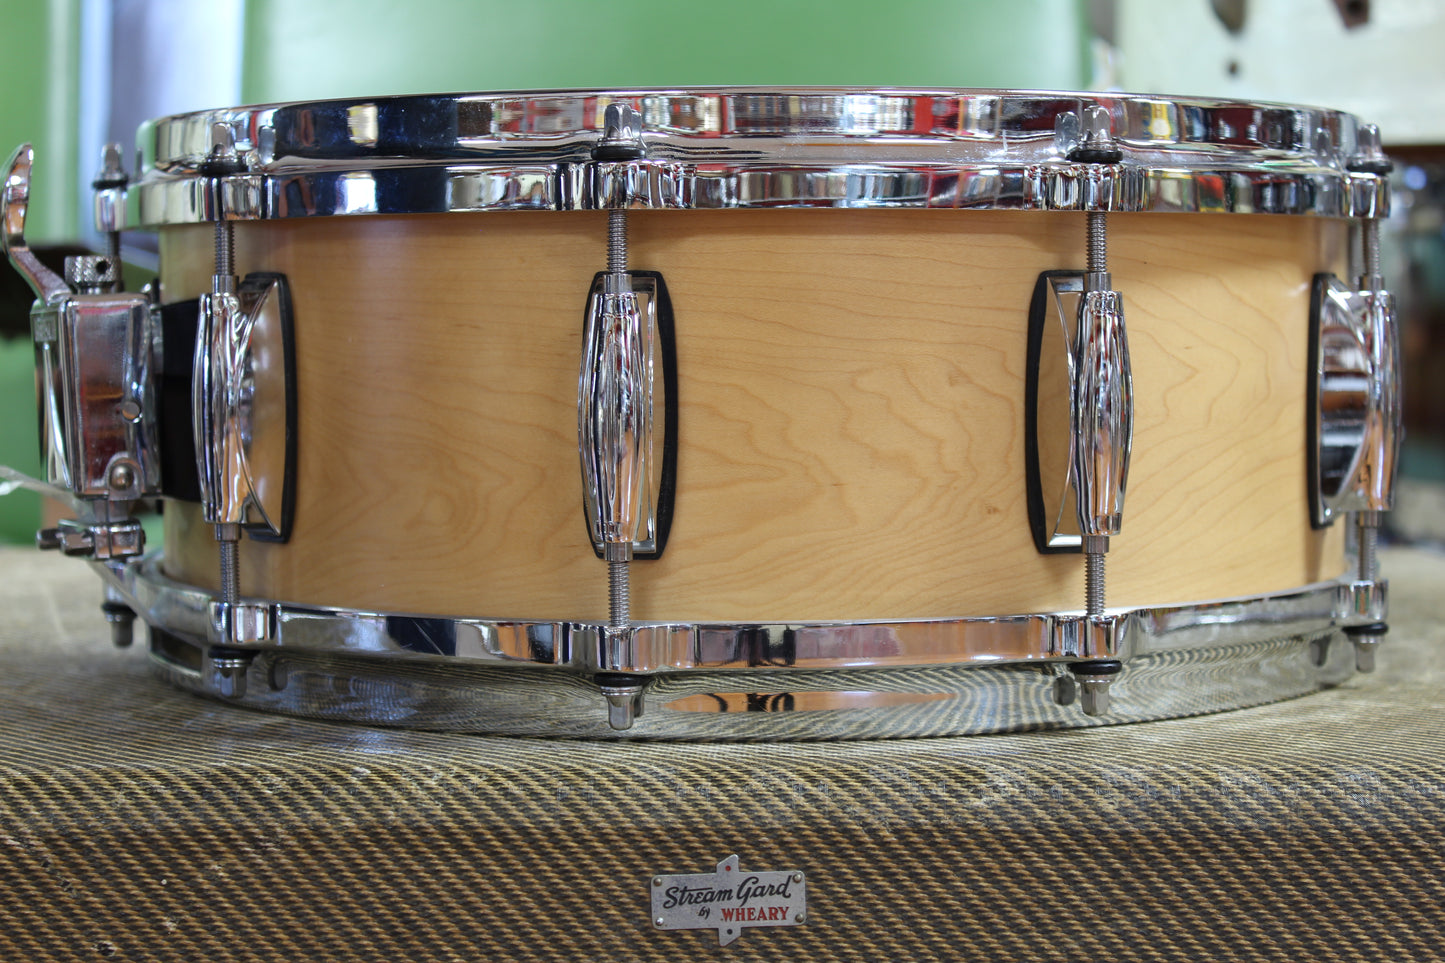 00s Gretsch Solid Ply Snare Drum 5.5"x14"